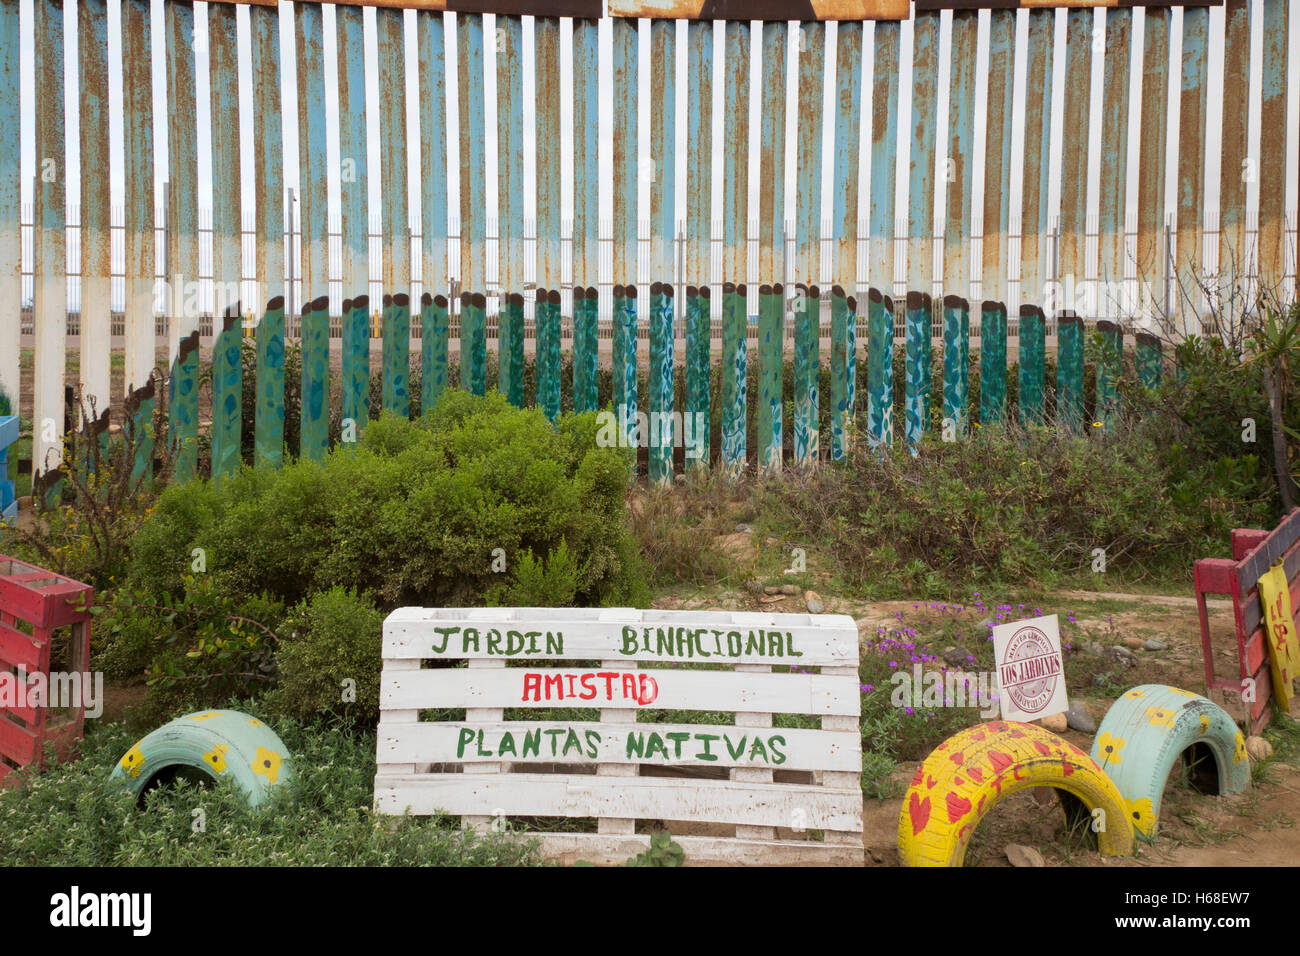 Tijuana, Mexico - The Binational Friendship Garden is maintained by volunteers on both sides of the U.S.-Mexico border fence. Stock Photo